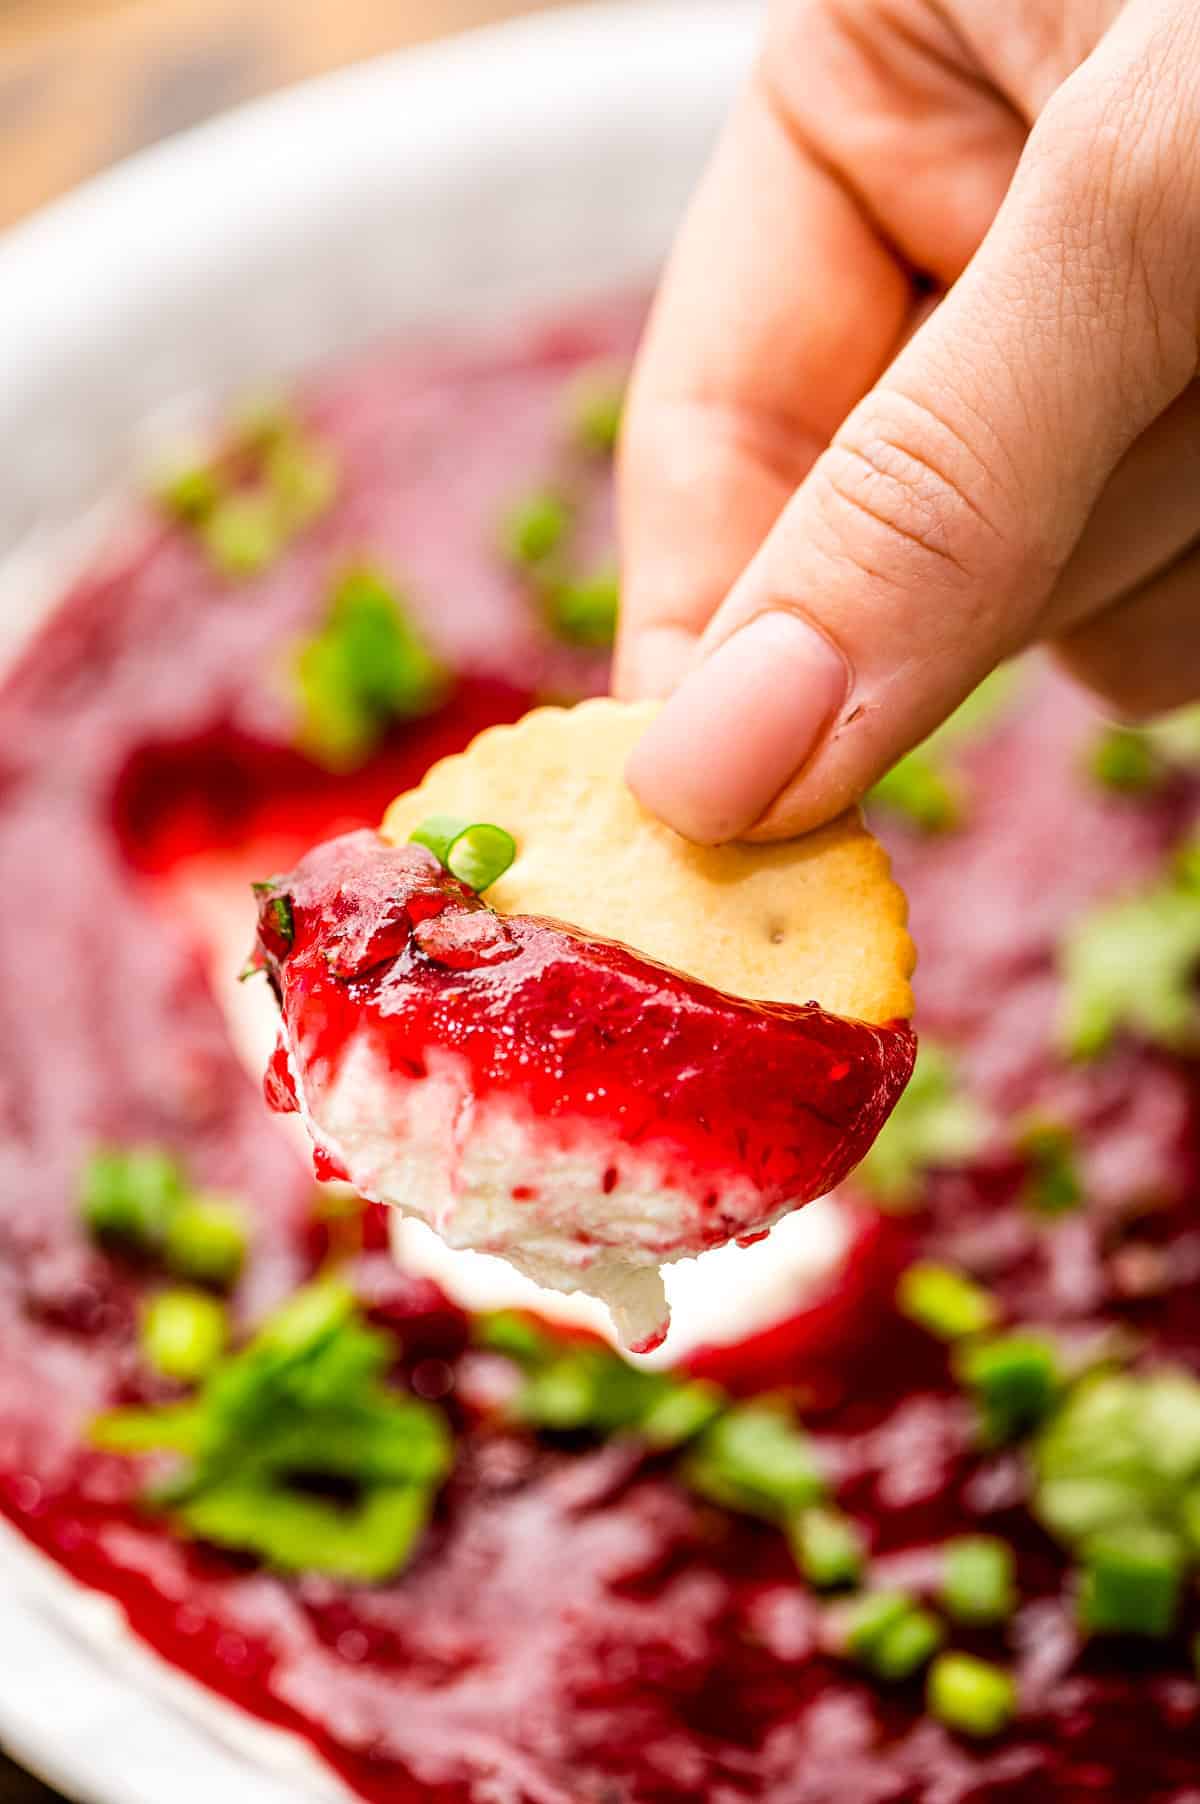 Hand holding cracker with cranberry dip on it